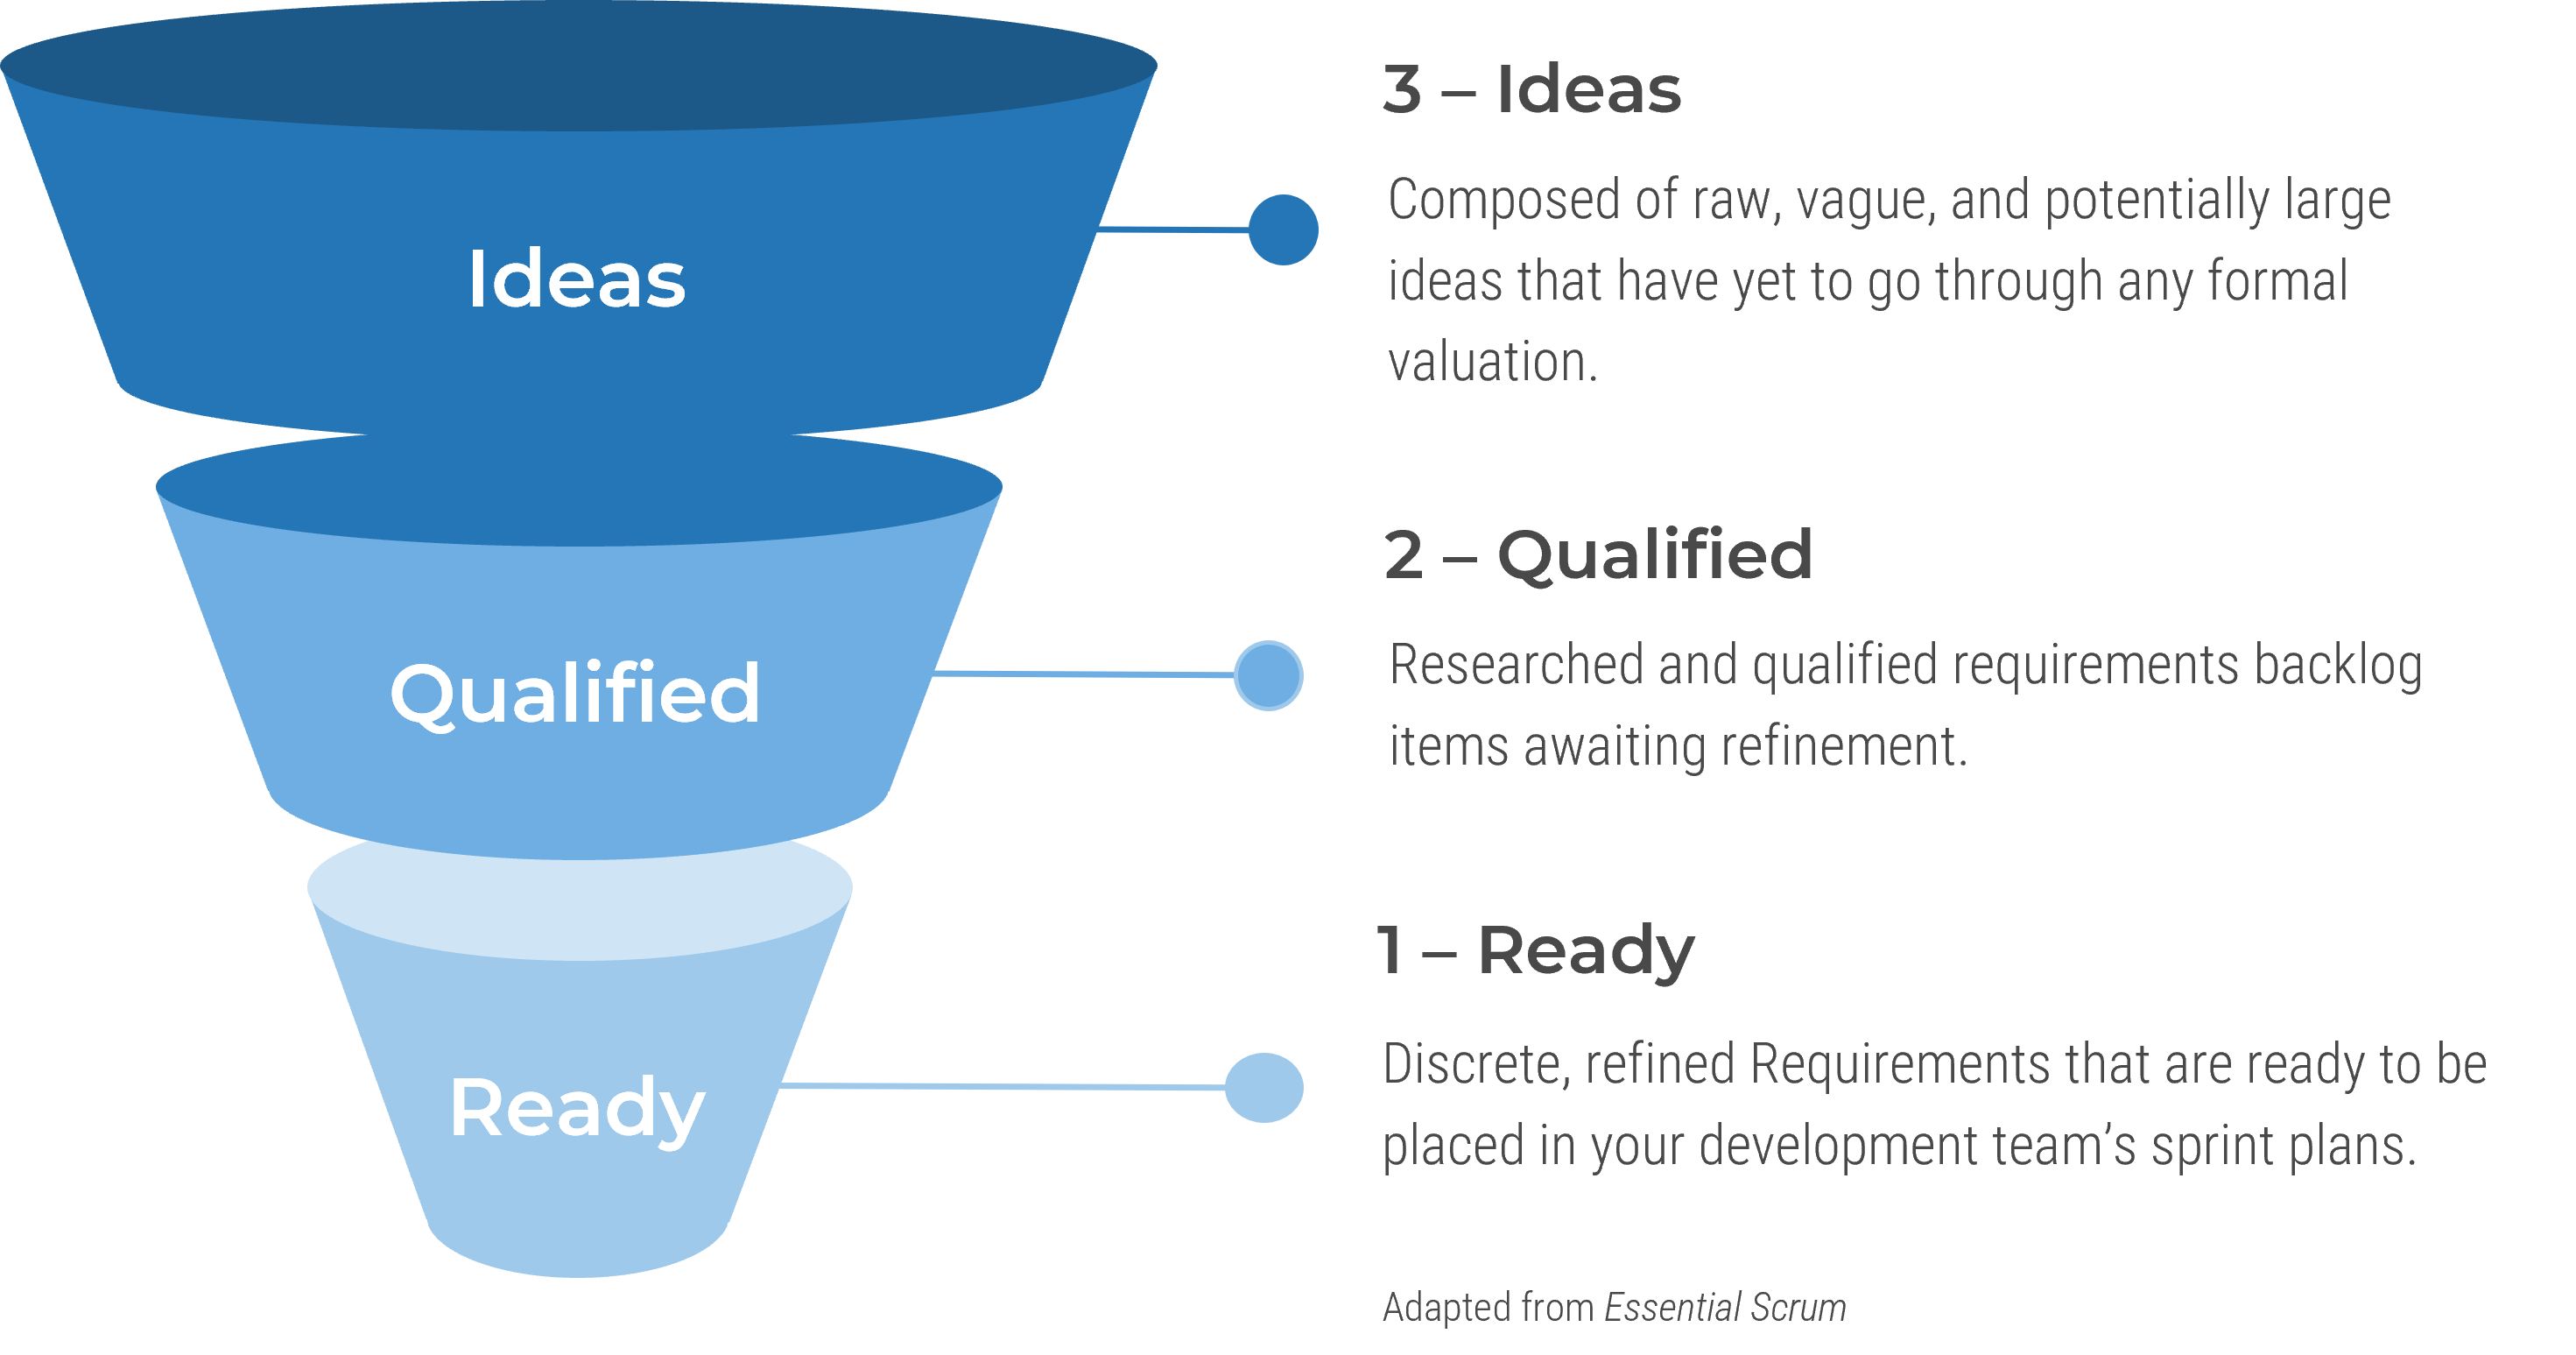 This is an image of an inverted funnel, with the top being labeled: Ideas; The middle being labeled: Qualified; and the bottom being labeled: Ready.